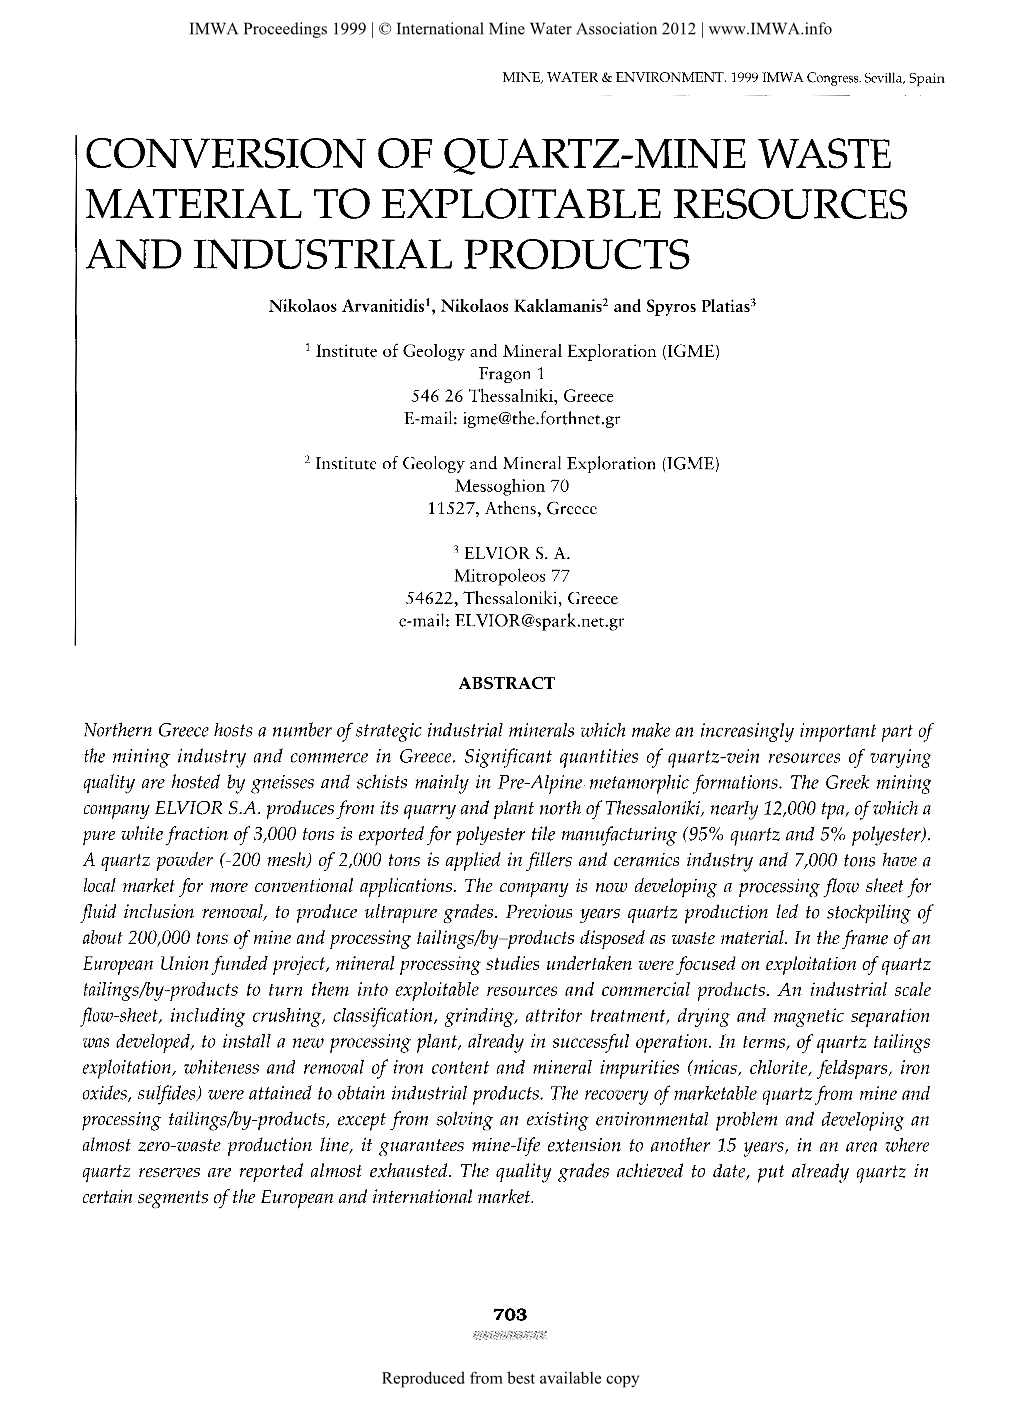 Conversion of Quartz-Mine Waste Material to Exploitable Resources and Industrial Products